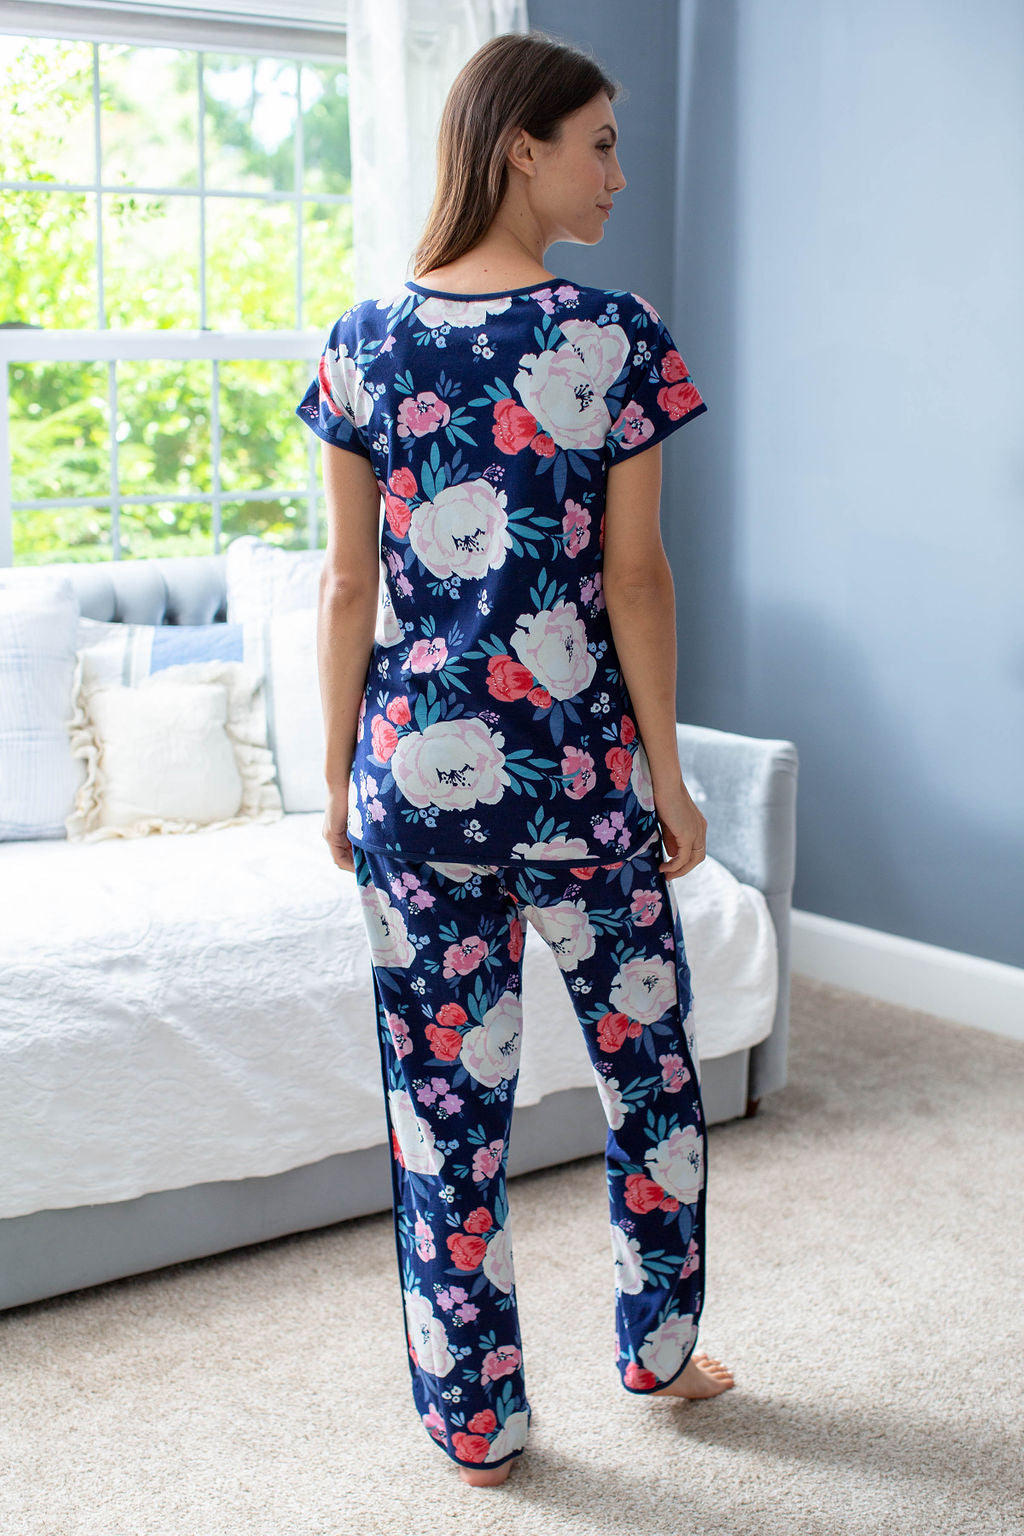 Maternity pajamas for hospital wear and beyond! Annabelle print with navy background, large cream flowers, blue petals, and smaller pink flowers. Feminine and stylish print to outfit the whole family.